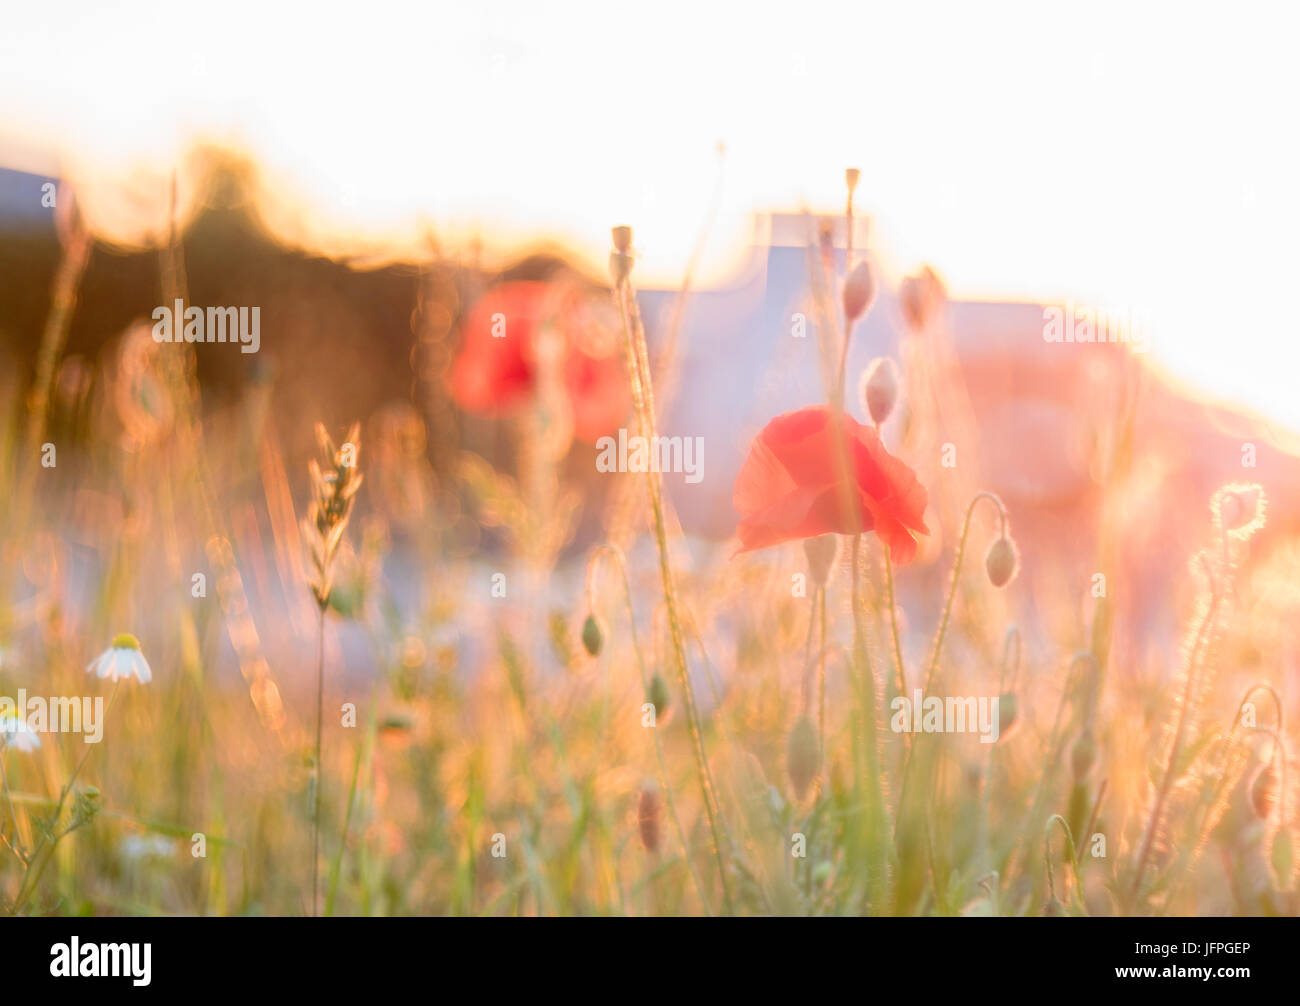 red poppys in the city at sundown / sunset, blurred background, high key Stock Photo